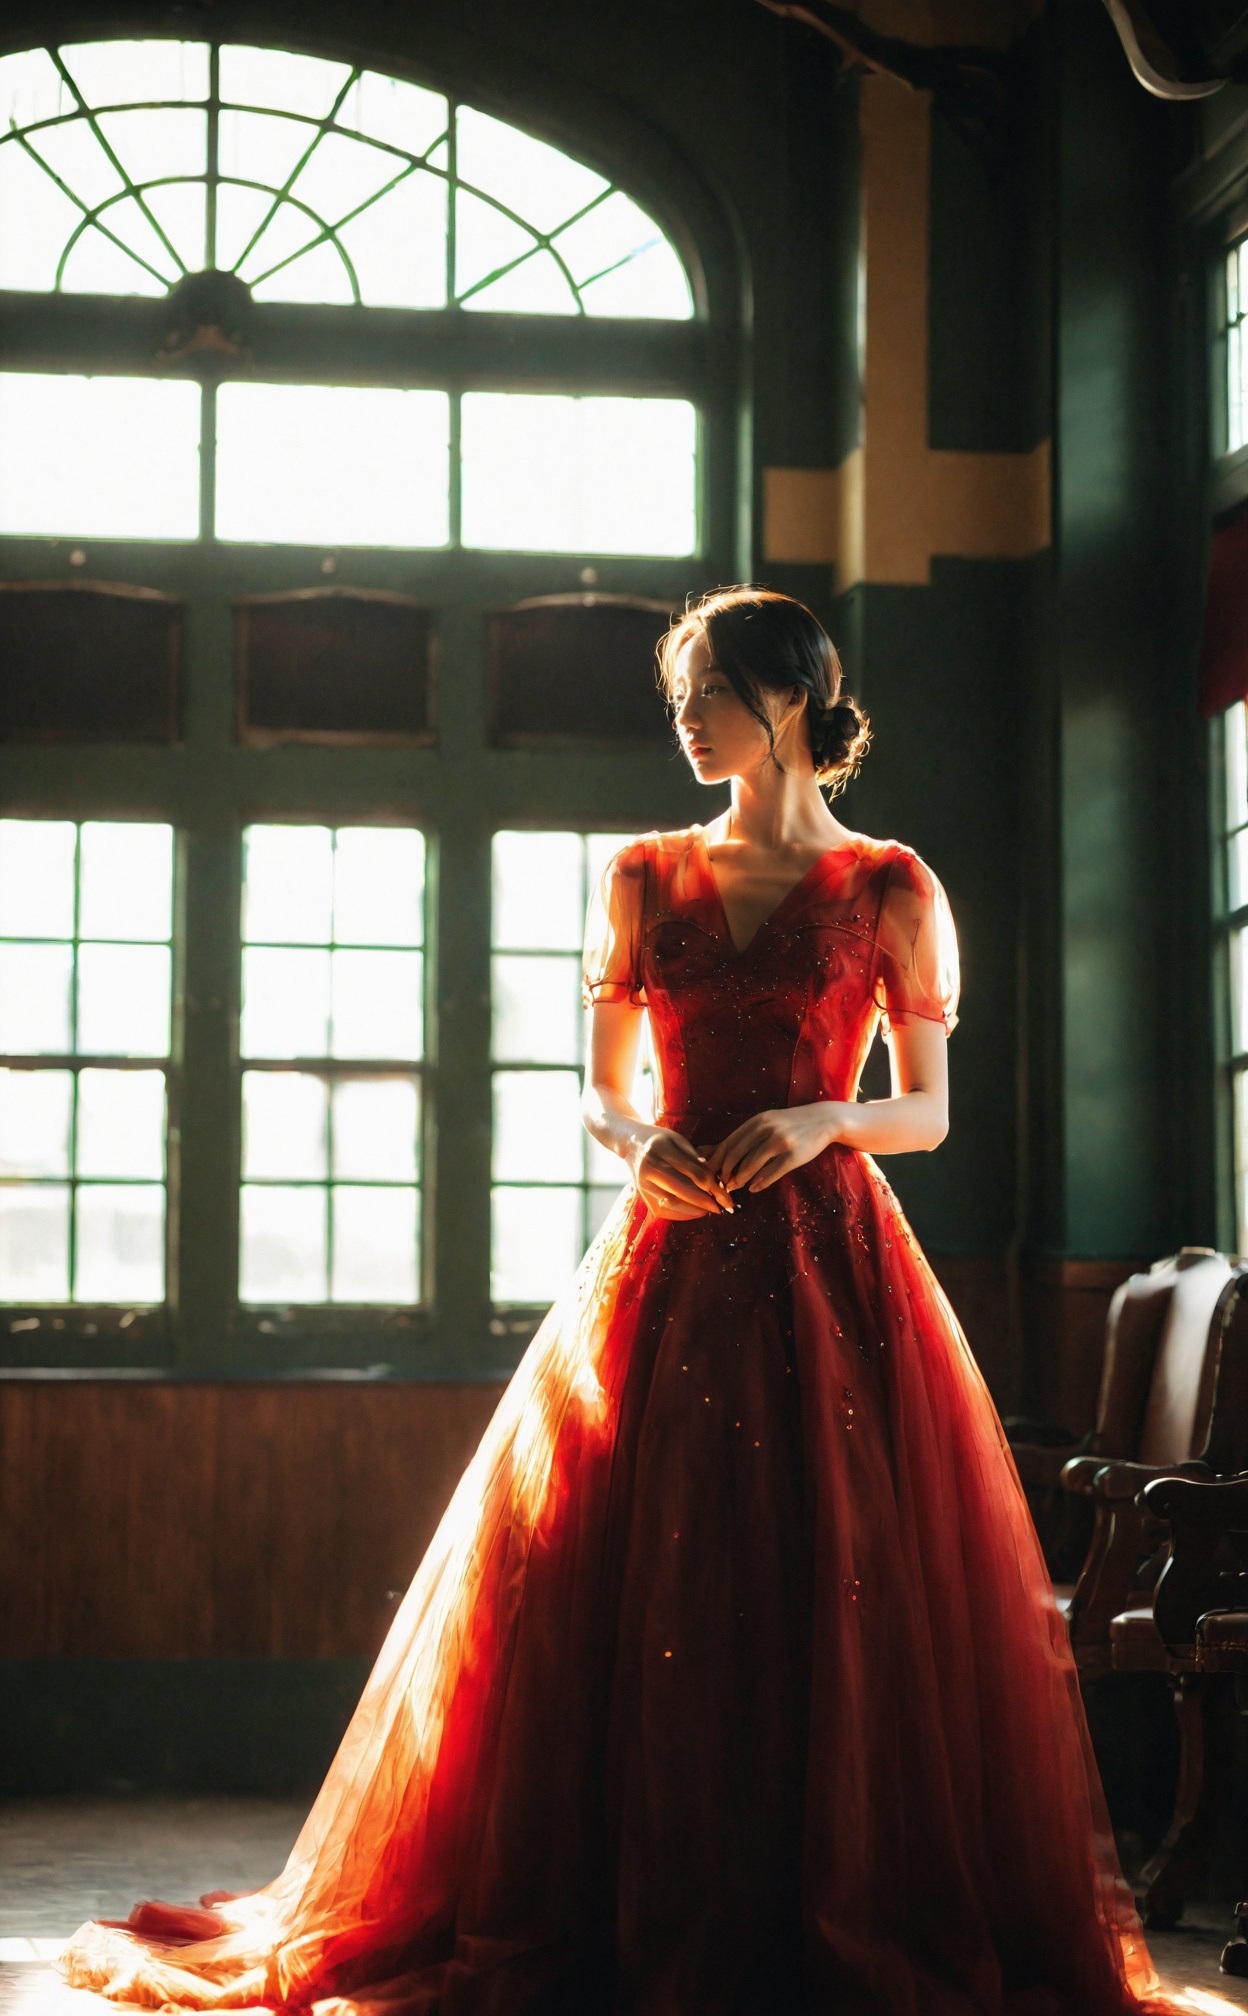 mugglelight, a woman in a red gown, posing in a vintage train station with sunlight streaming through the windows, romantic atmosphere, classic allure, cinematic lighting.korean girl,black hair,